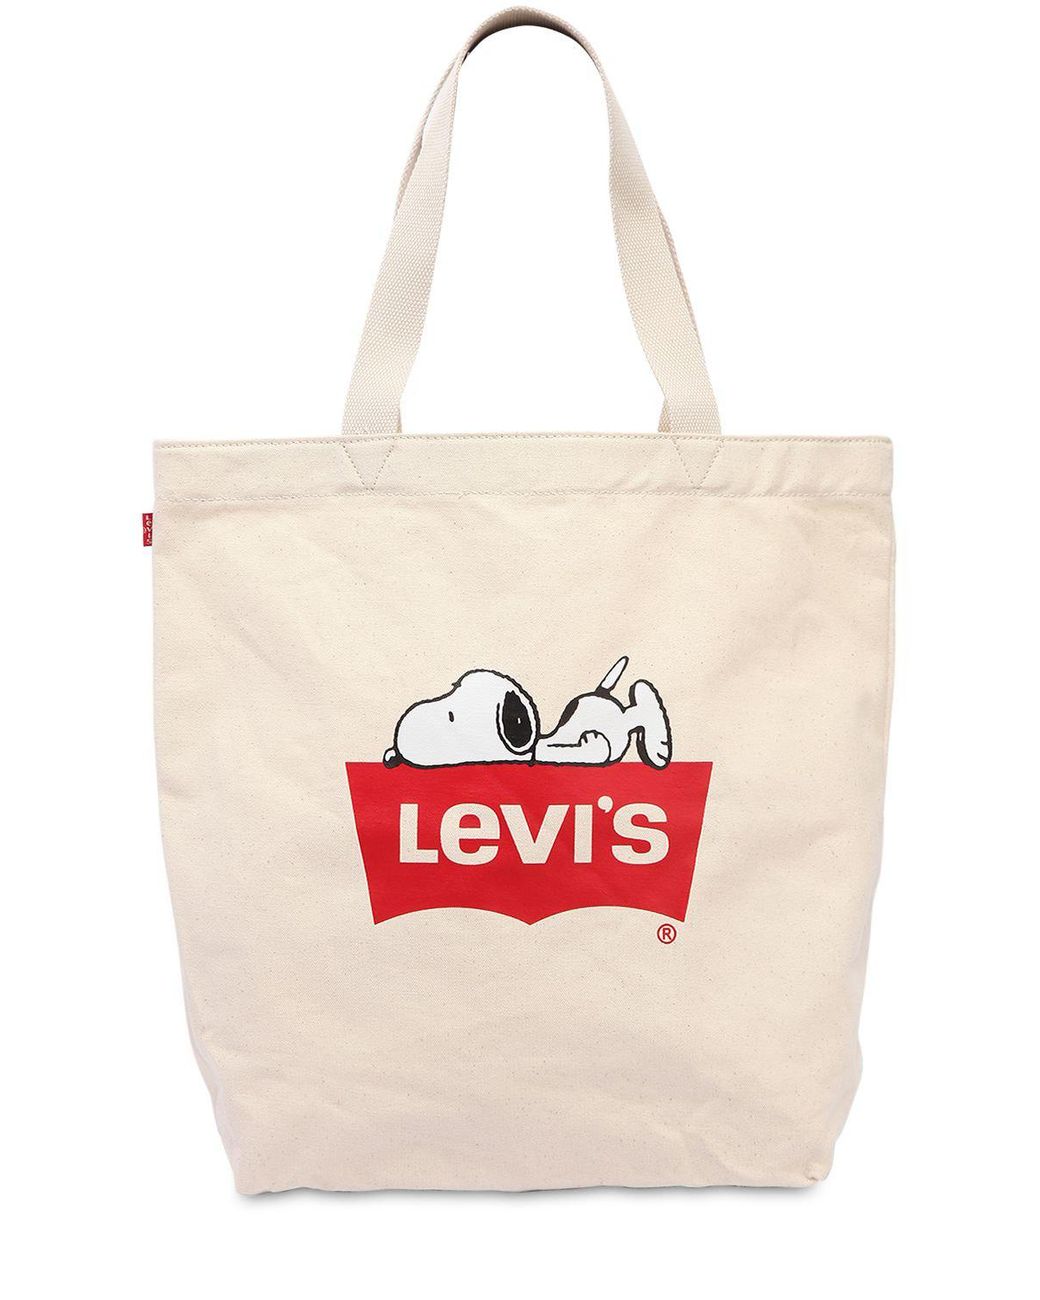 Recycled Snoopy Shopper Bag | House of Disaster | Lisa Angel